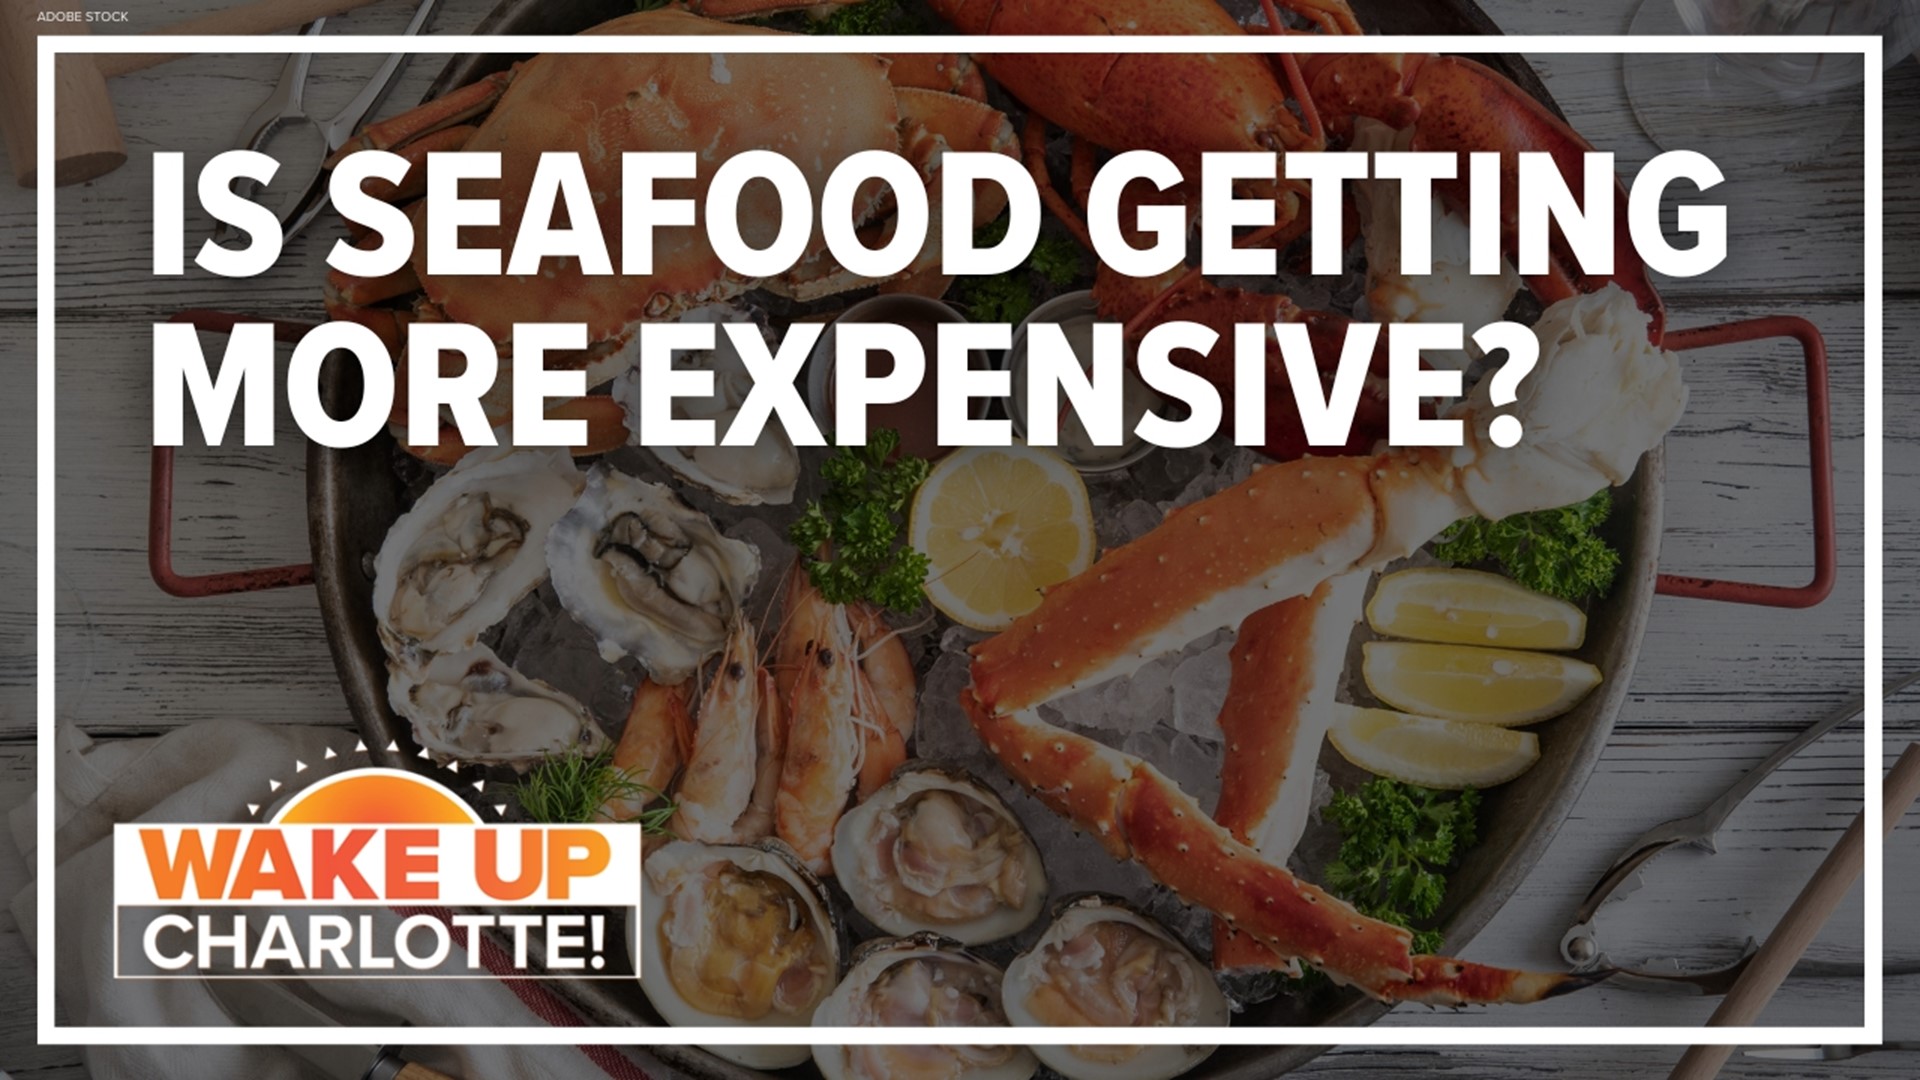 Rising sea levels and warmer waters are driving up the cost of seafood, which is having a big impact on the culinary industry.